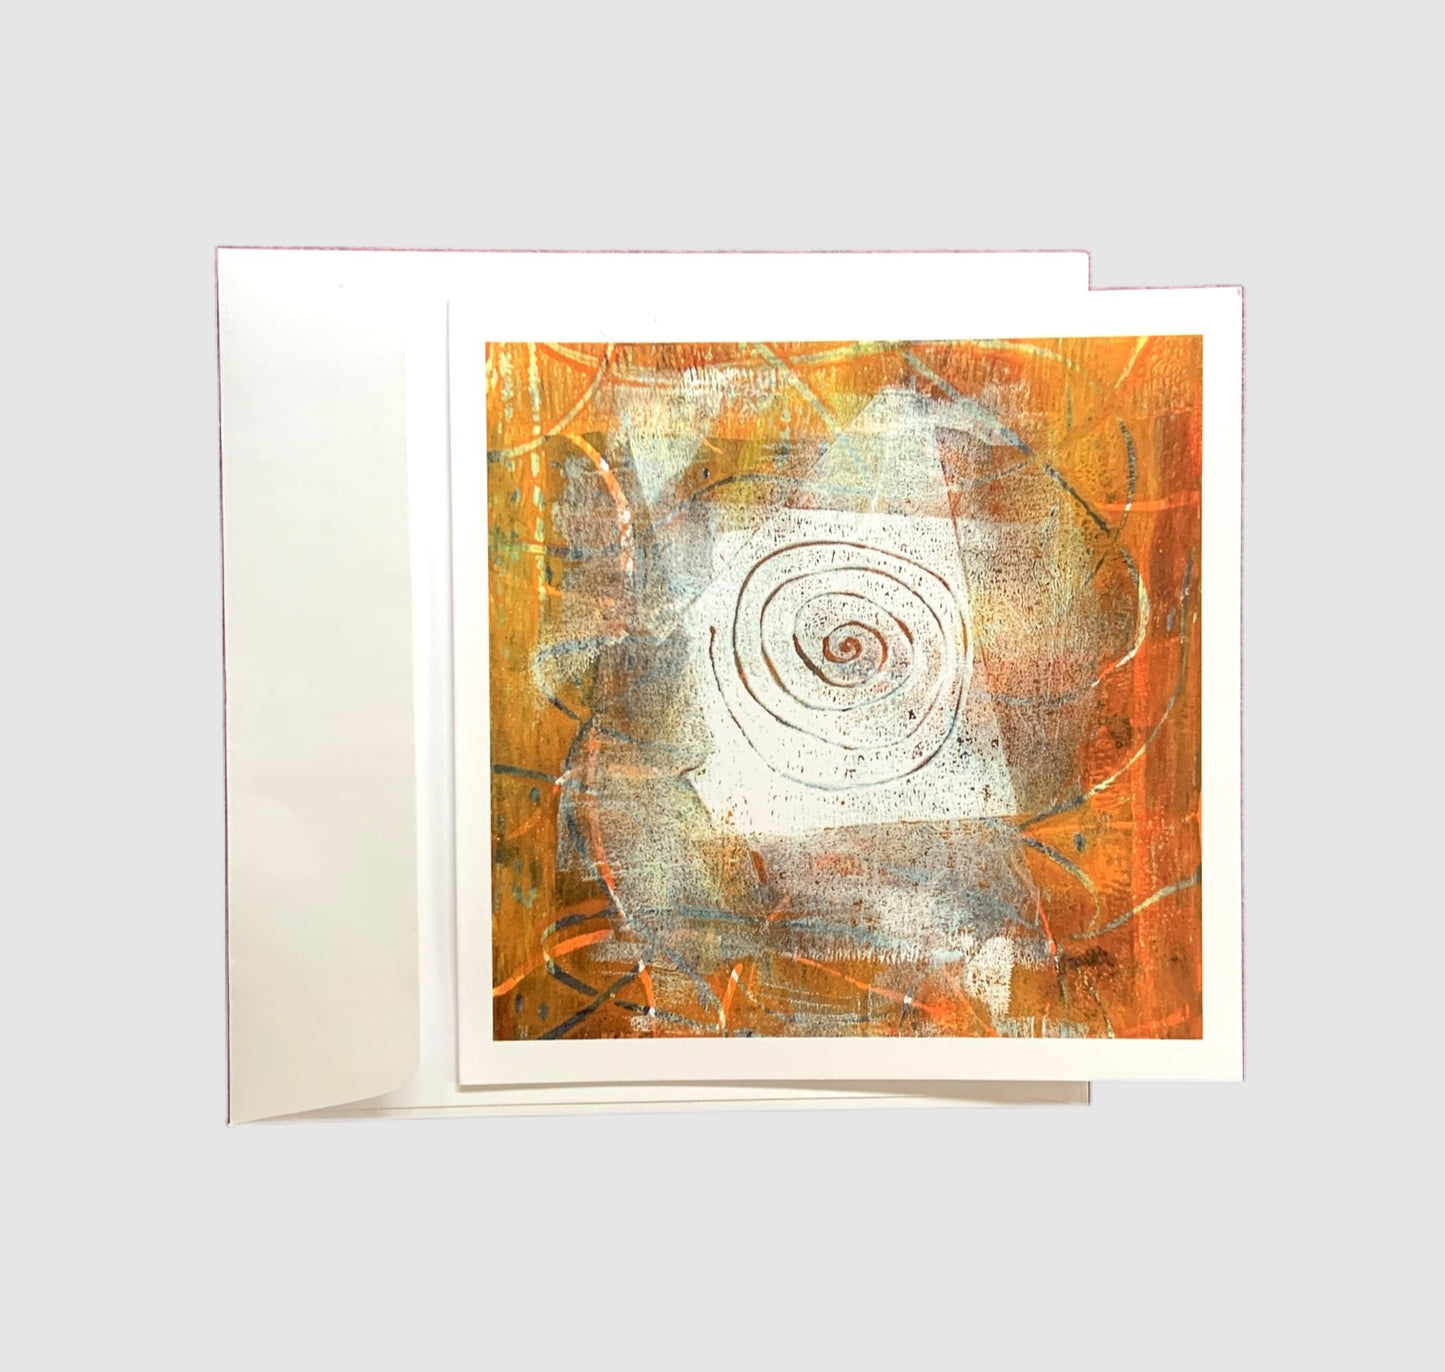 Greeting Card - Orange Abstract with Spiral